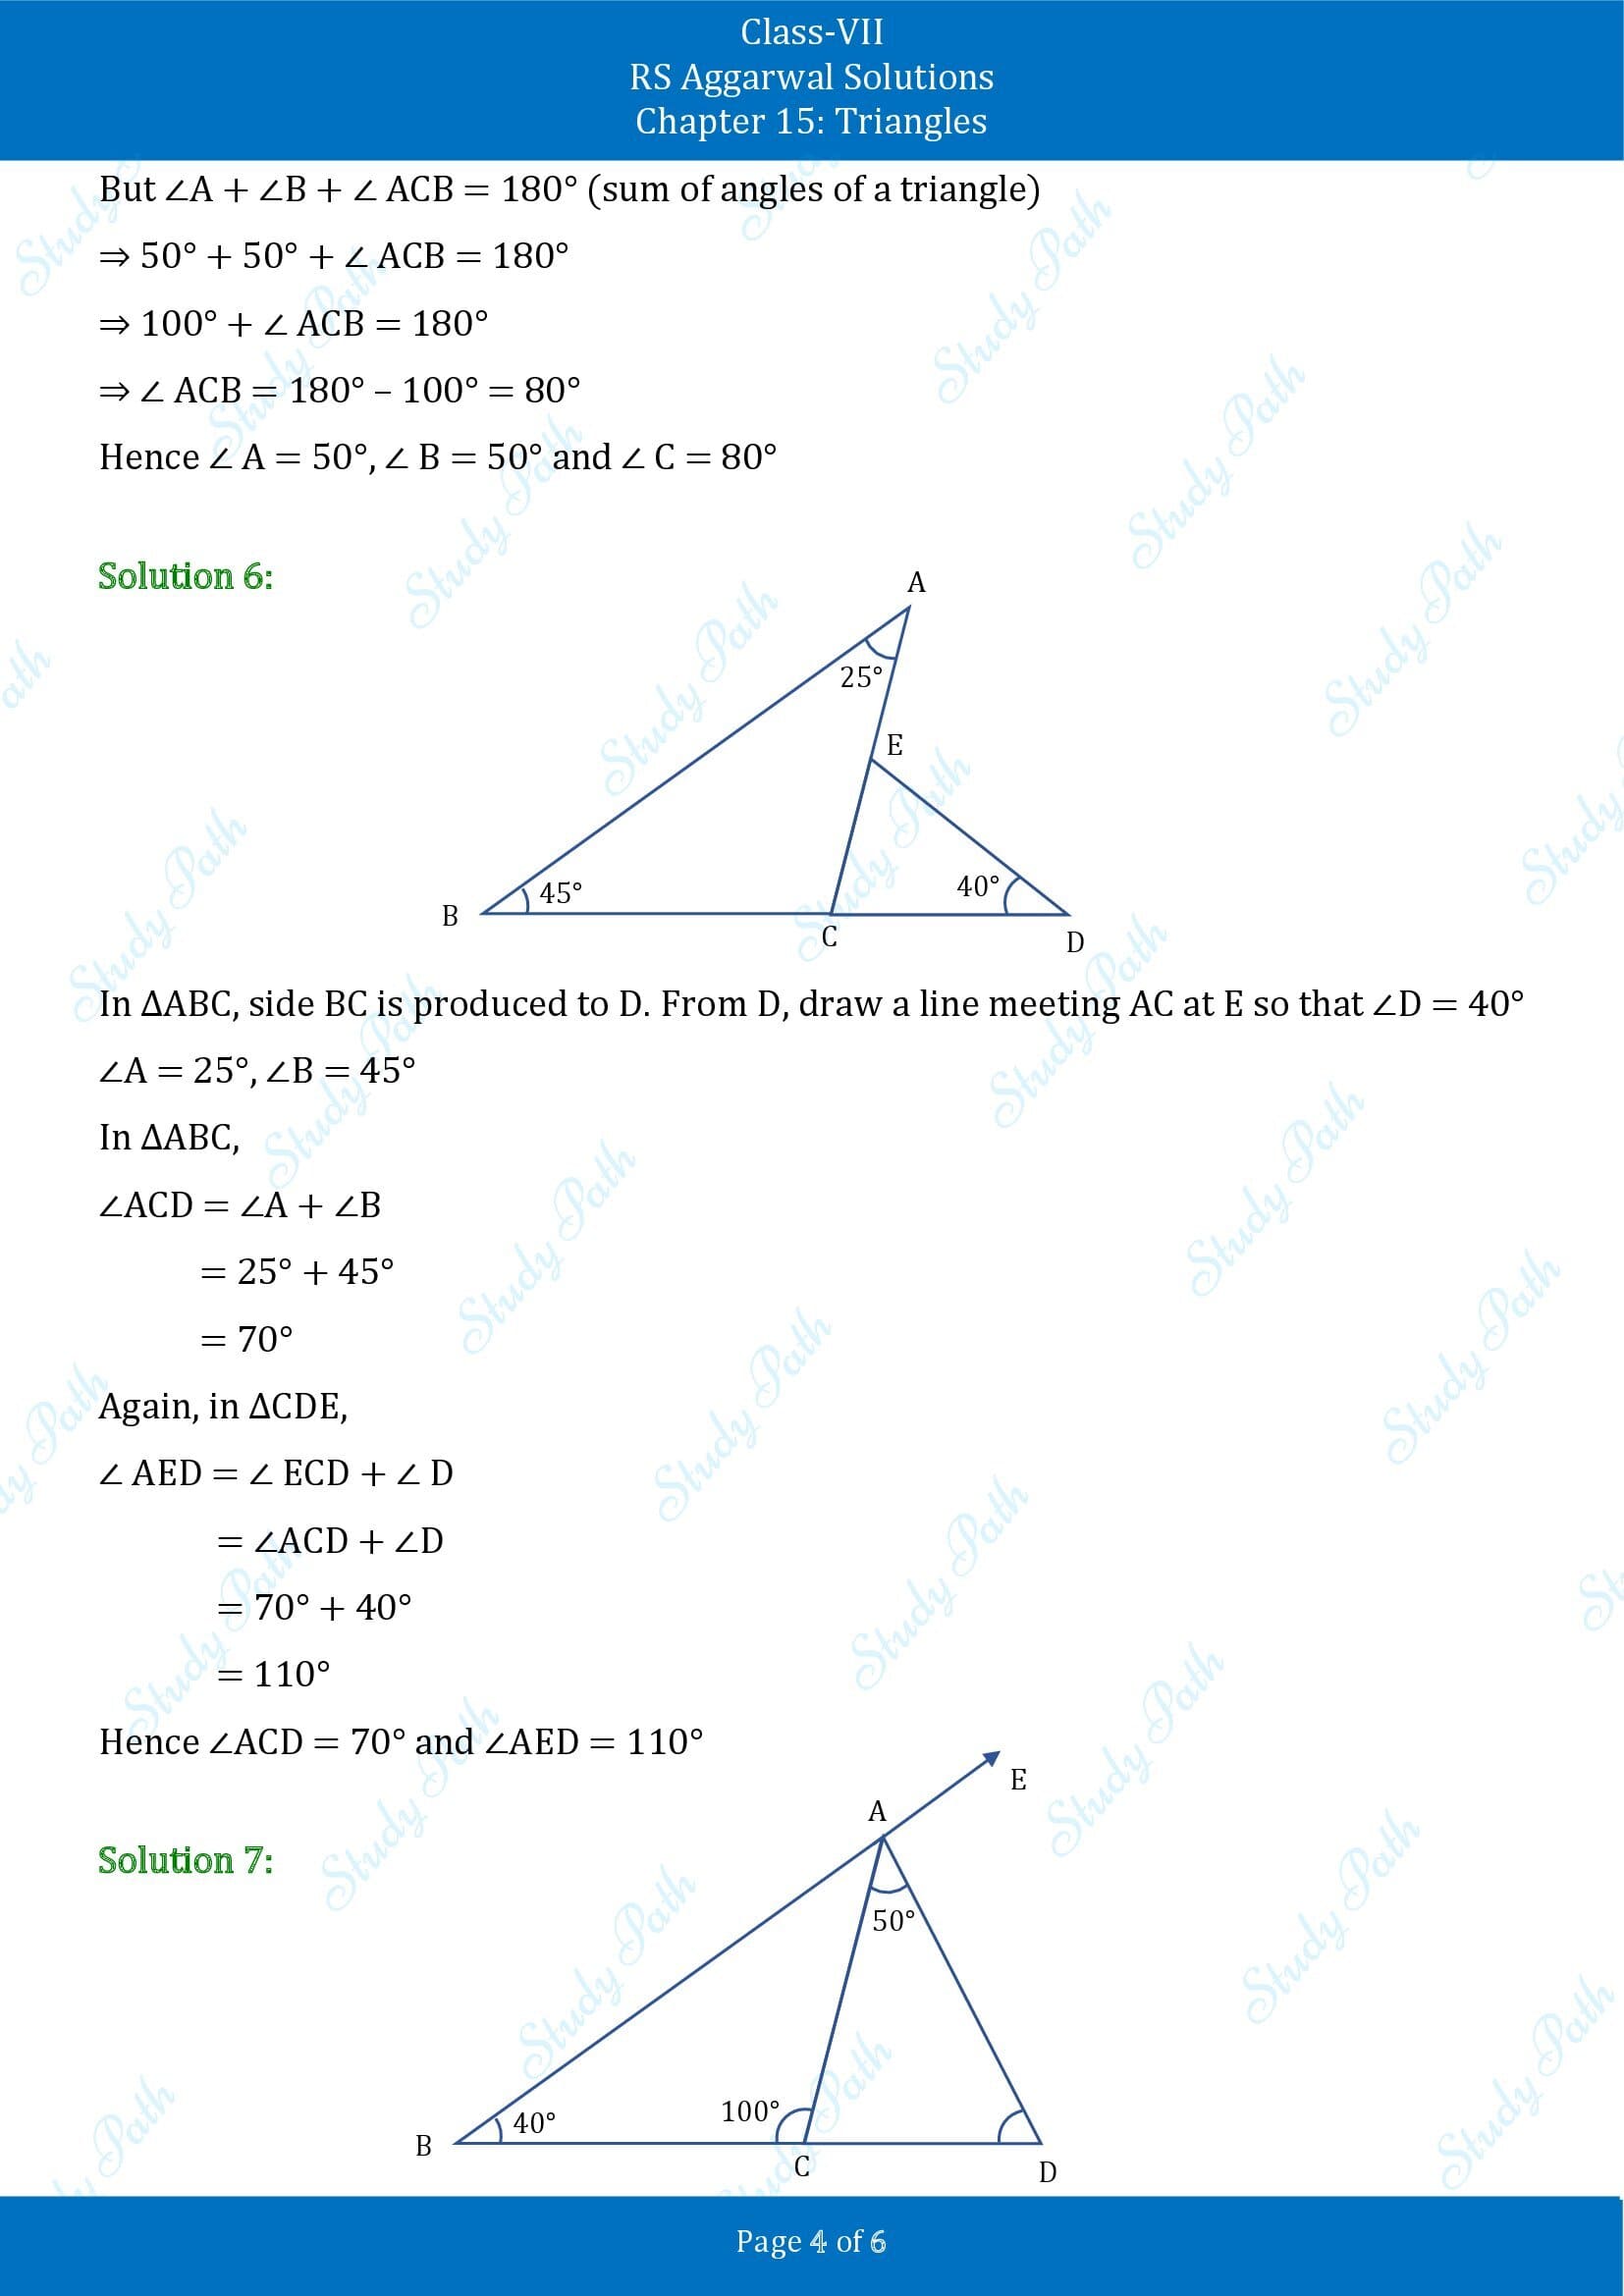 RS Aggarwal Solutions Class 7 Chapter 15 Triangles Exercise 15B 00004